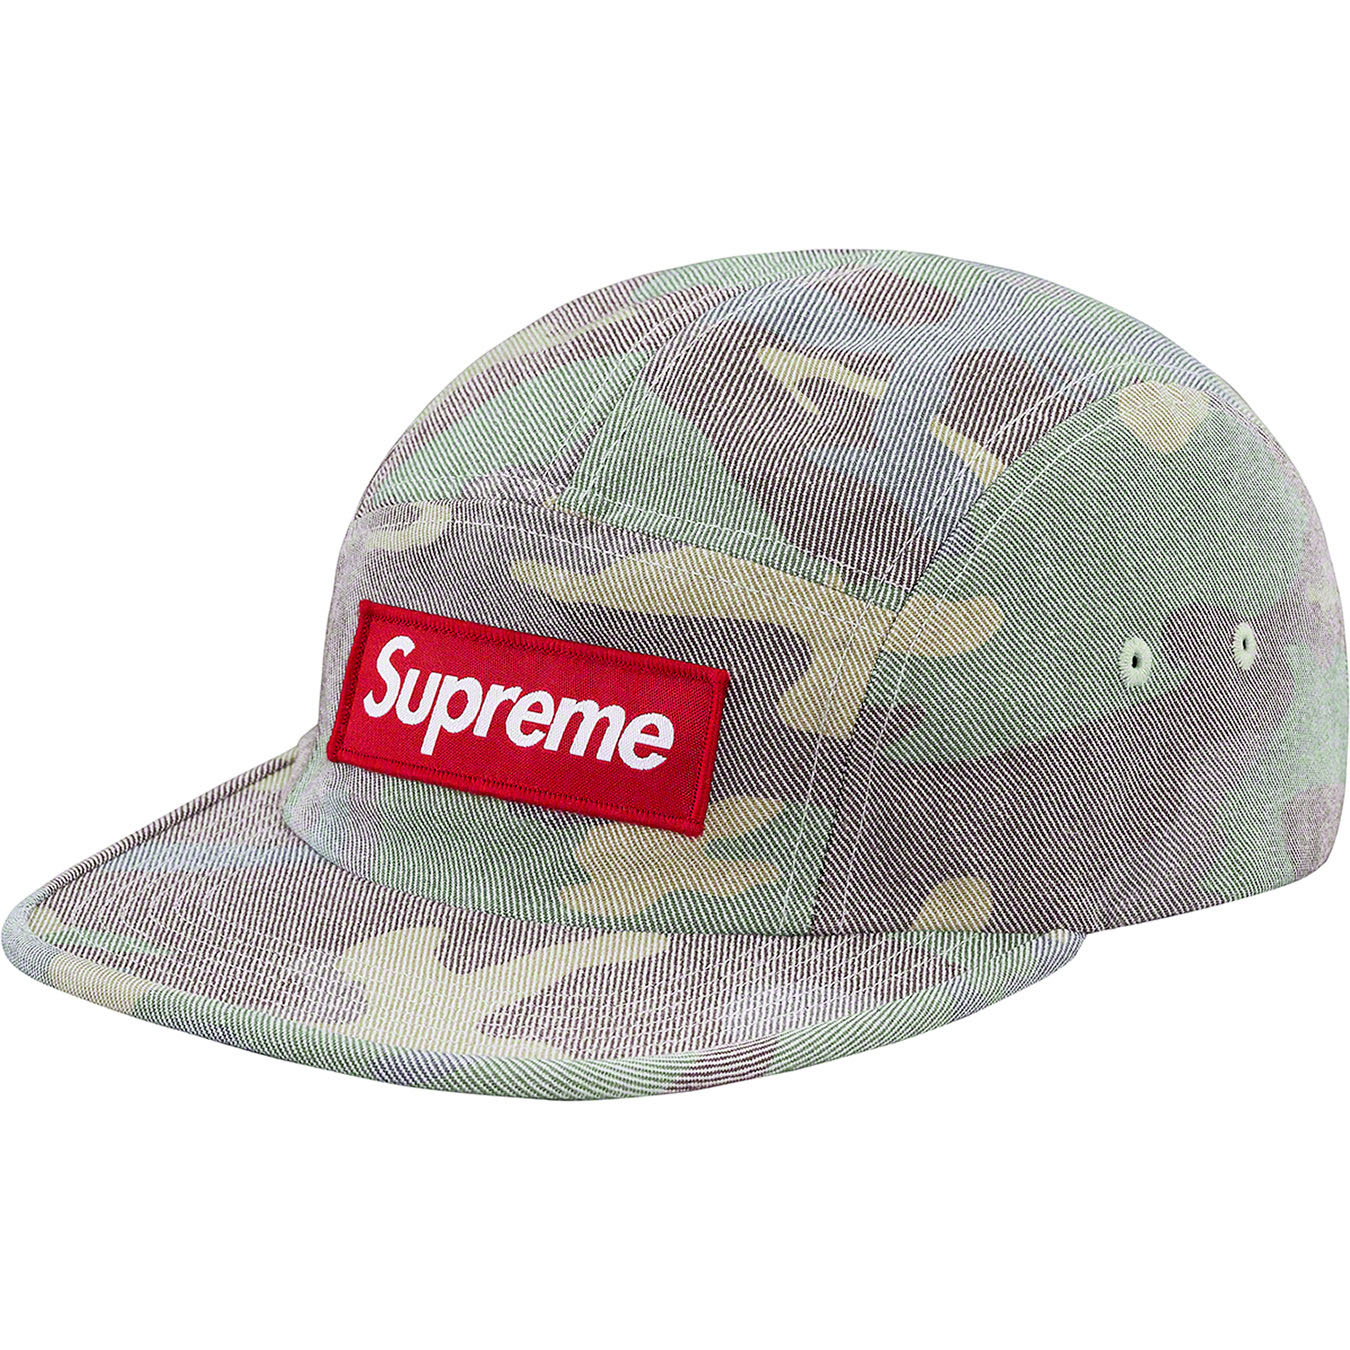 Supreme Washed Out Camo Camp Cap